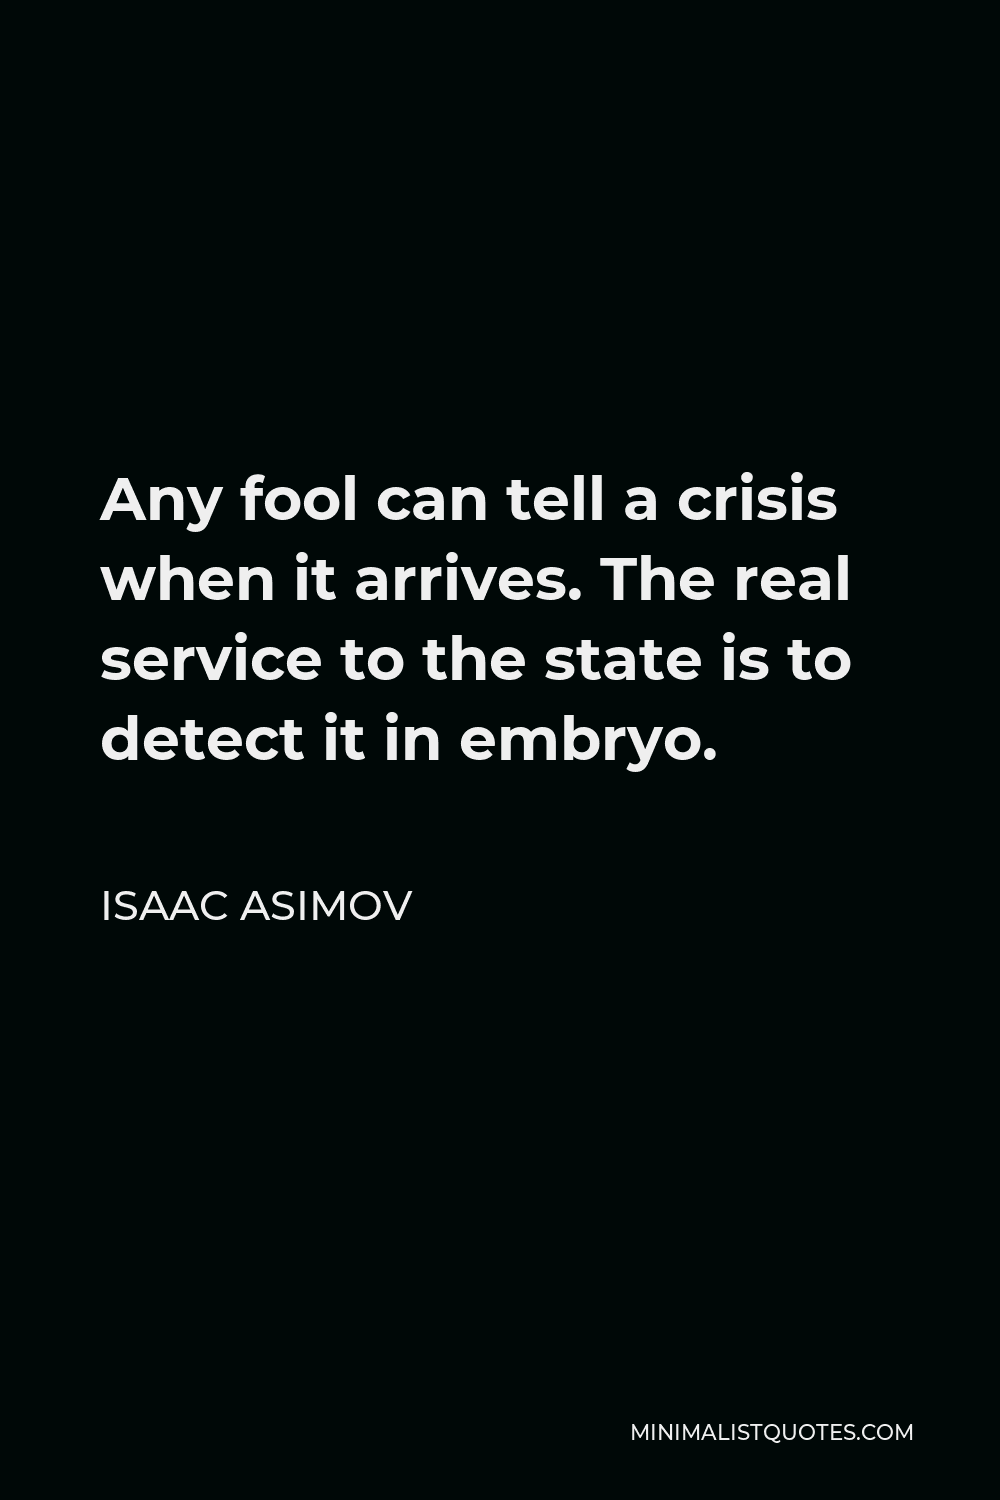 Isaac Asimov Quote - Any fool can tell a crisis when it arrives. The real service to the state is to detect it in embryo.